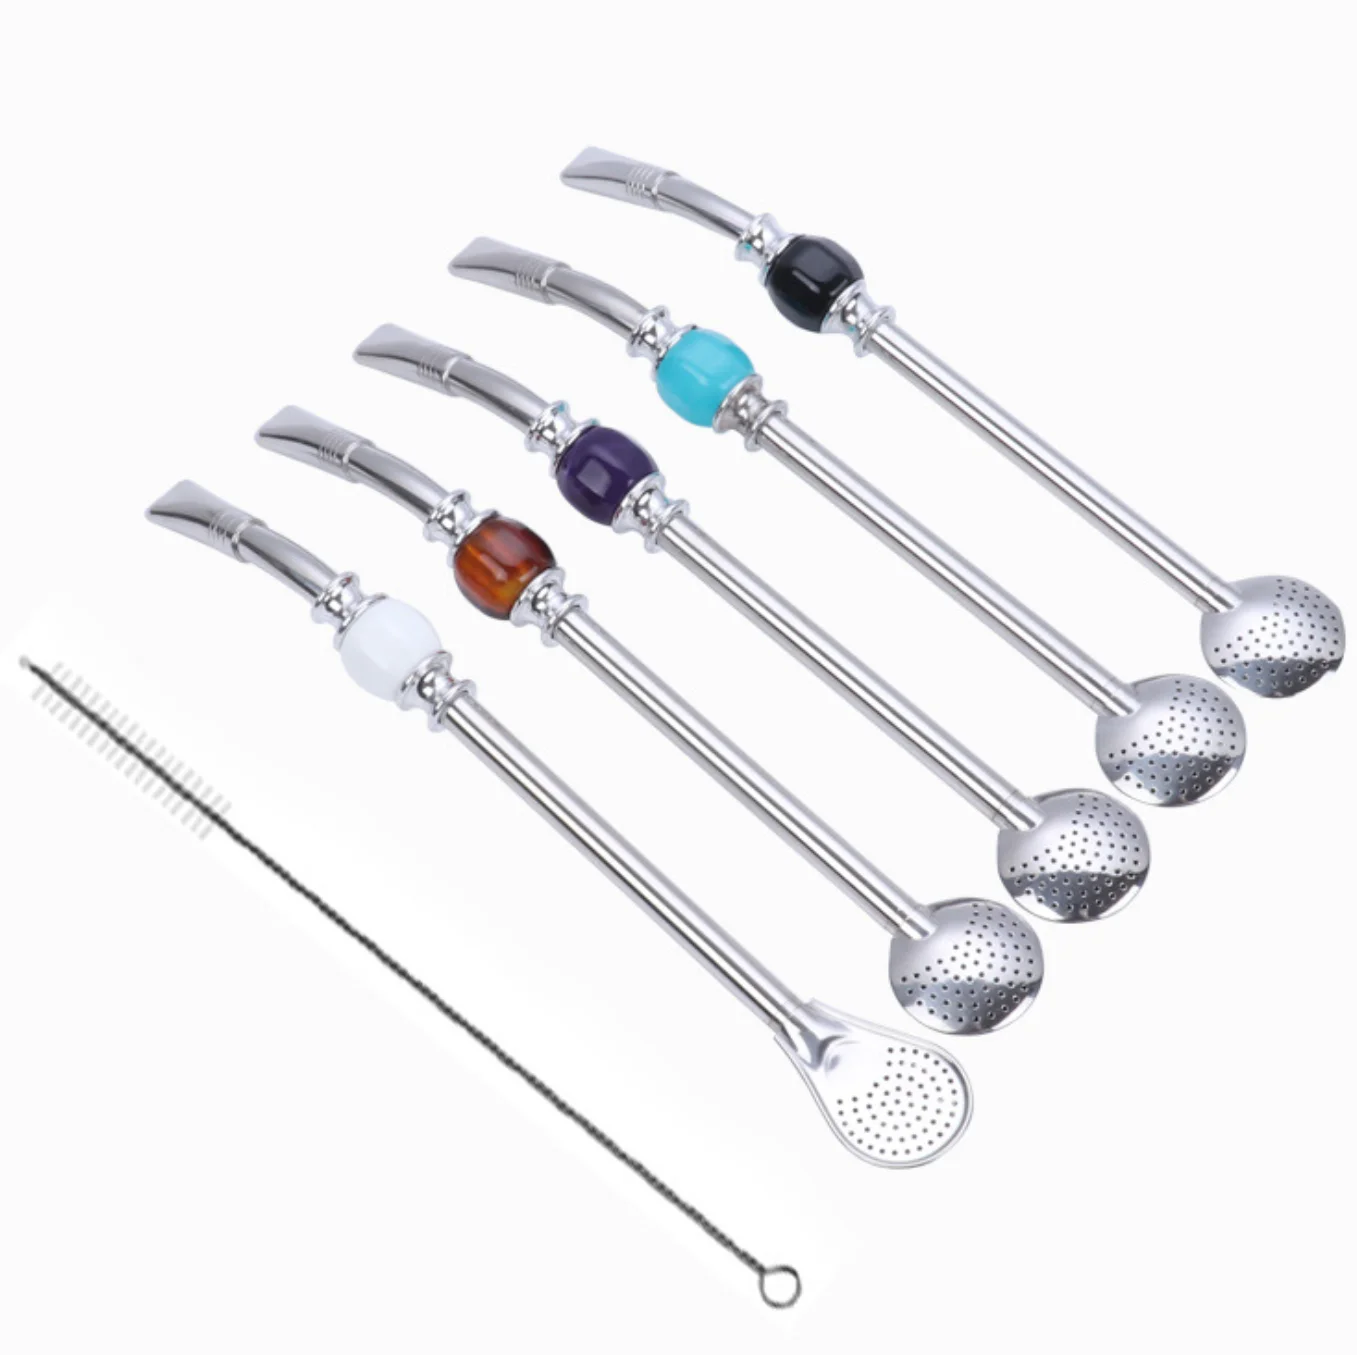 

Hot sale promotion wedding favor wedding bar gift coffee spoon soup spoon straws Mate tea infuser stirring stainless straw spoon, Colored